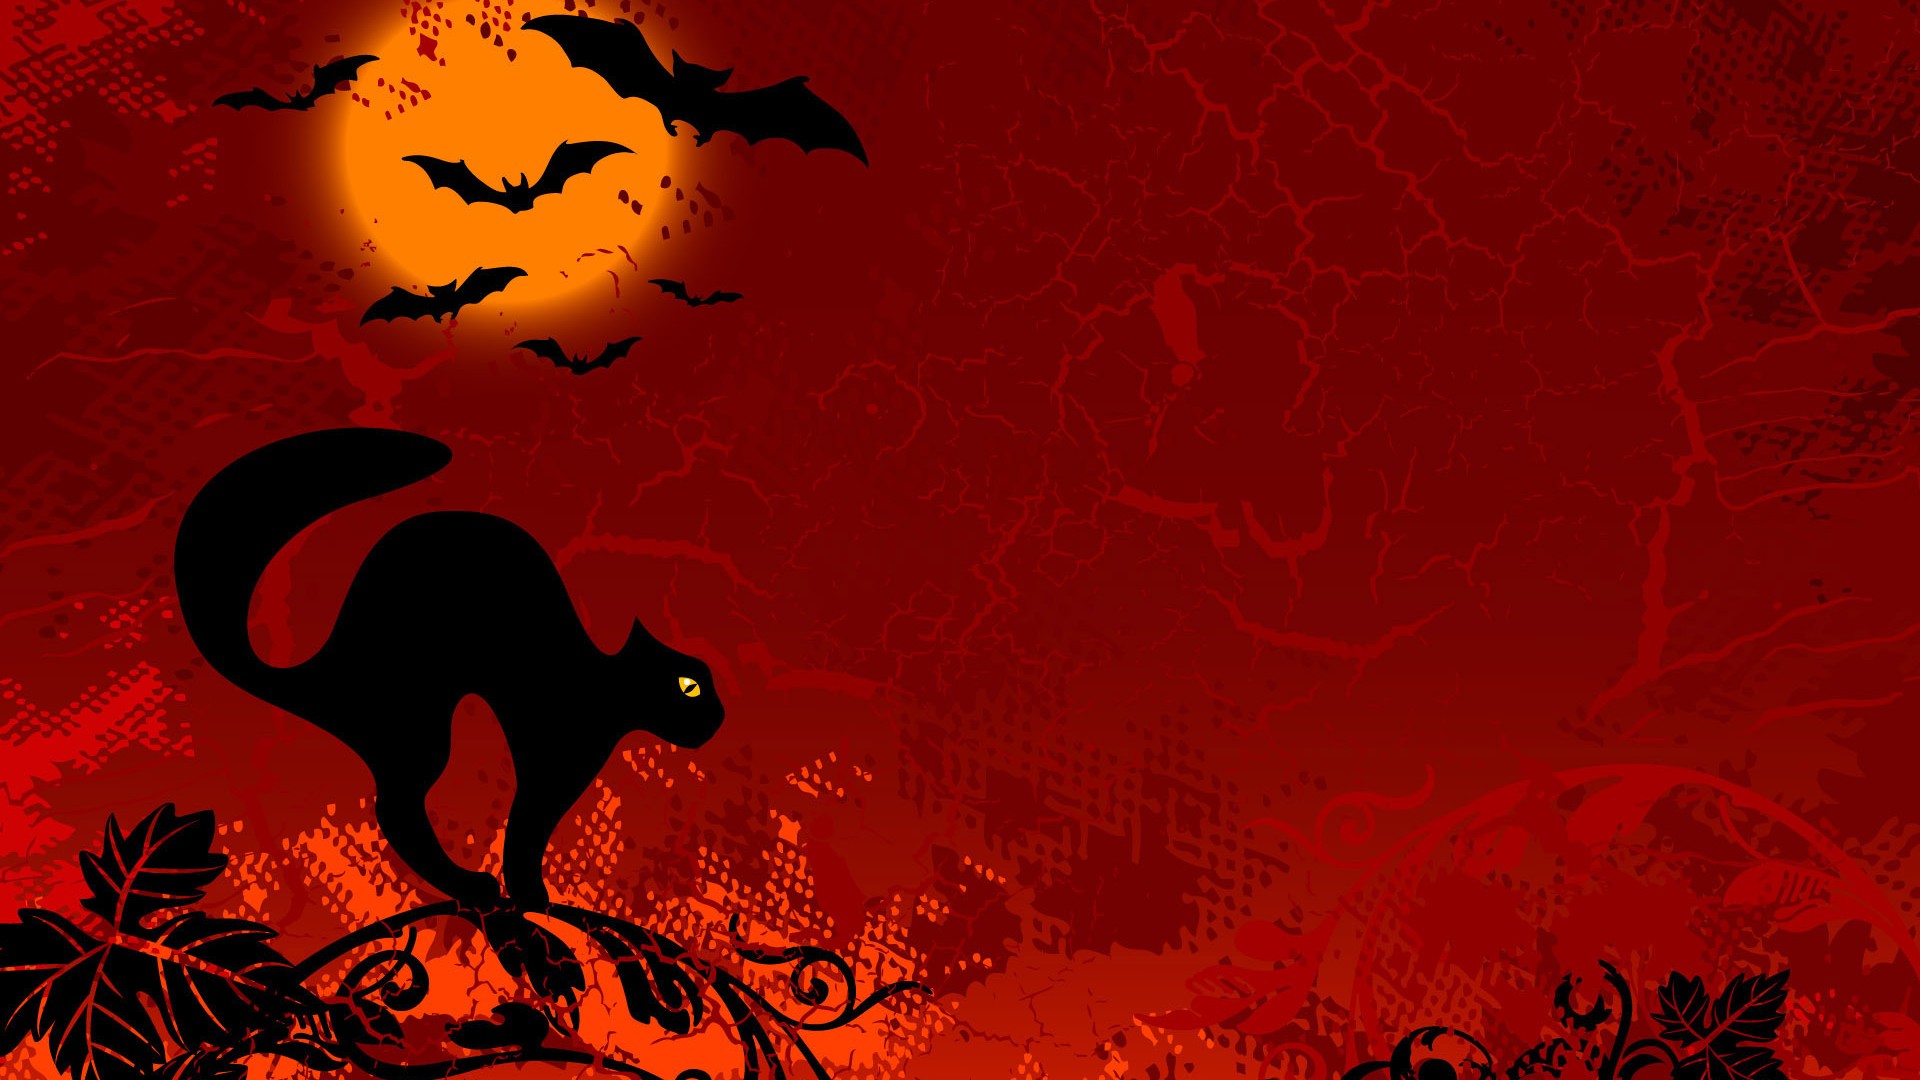 Halloween Aesthetic Desktop Wallpaper with high-resolution 1920x1080 pixel. You can use this wallpaper for your Windows and Mac OS computers as well as your Android and iPhone smartphones